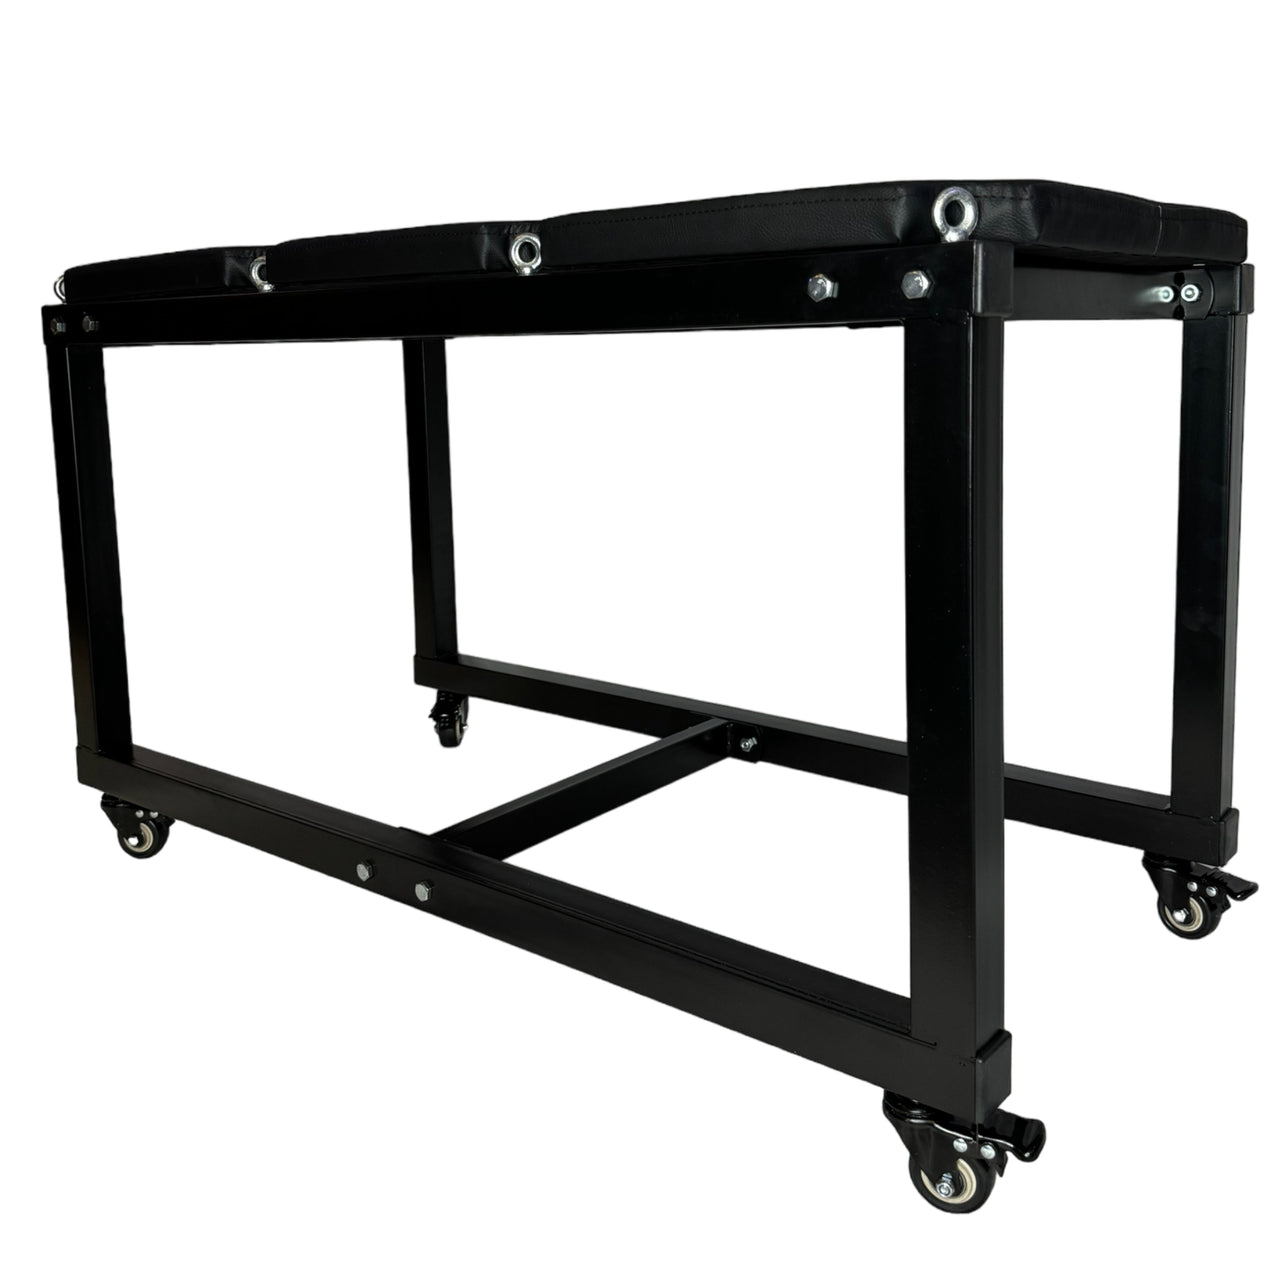 Roomsacred Luxury BDSM Bondage Table with 4 Wrist and Ankle Cuffs and 8 Attachment Points BDSM Restraints Adult Play